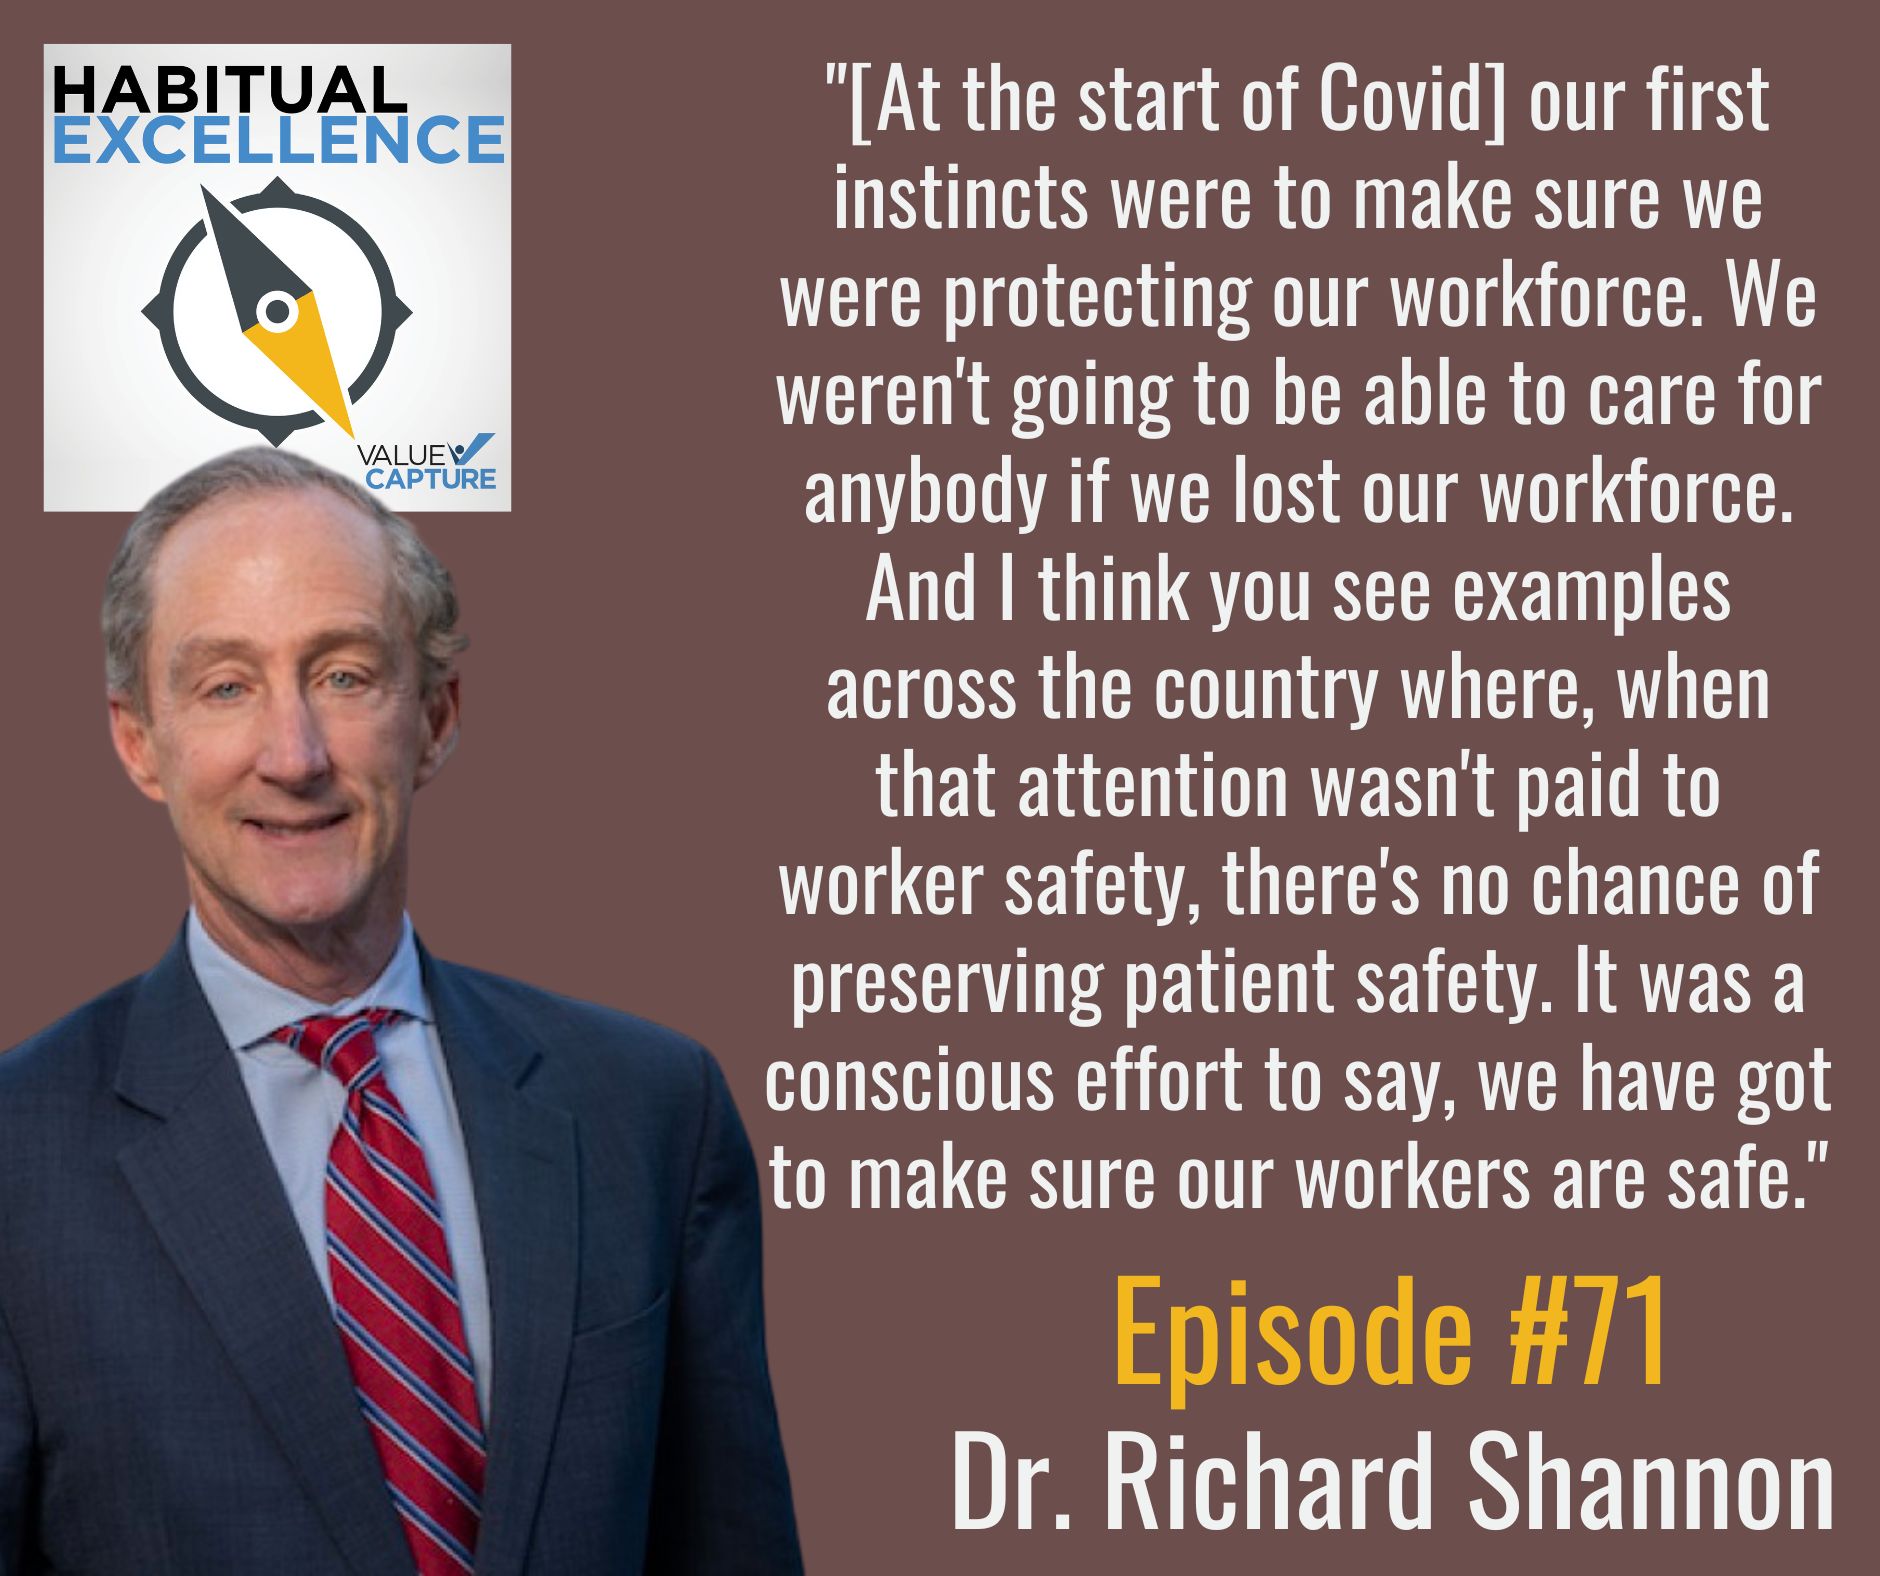 "[At the start of Covid] our first instincts were to make sure we were protecting our workforce. We weren't going to be able to care for anybody if we lost our workforce. And I think you see examples across the country where, when that attention wasn't paid to worker safety, there's no chance of preserving patient safety. It was a conscious effort to say, we have got to make sure our workers are safe."